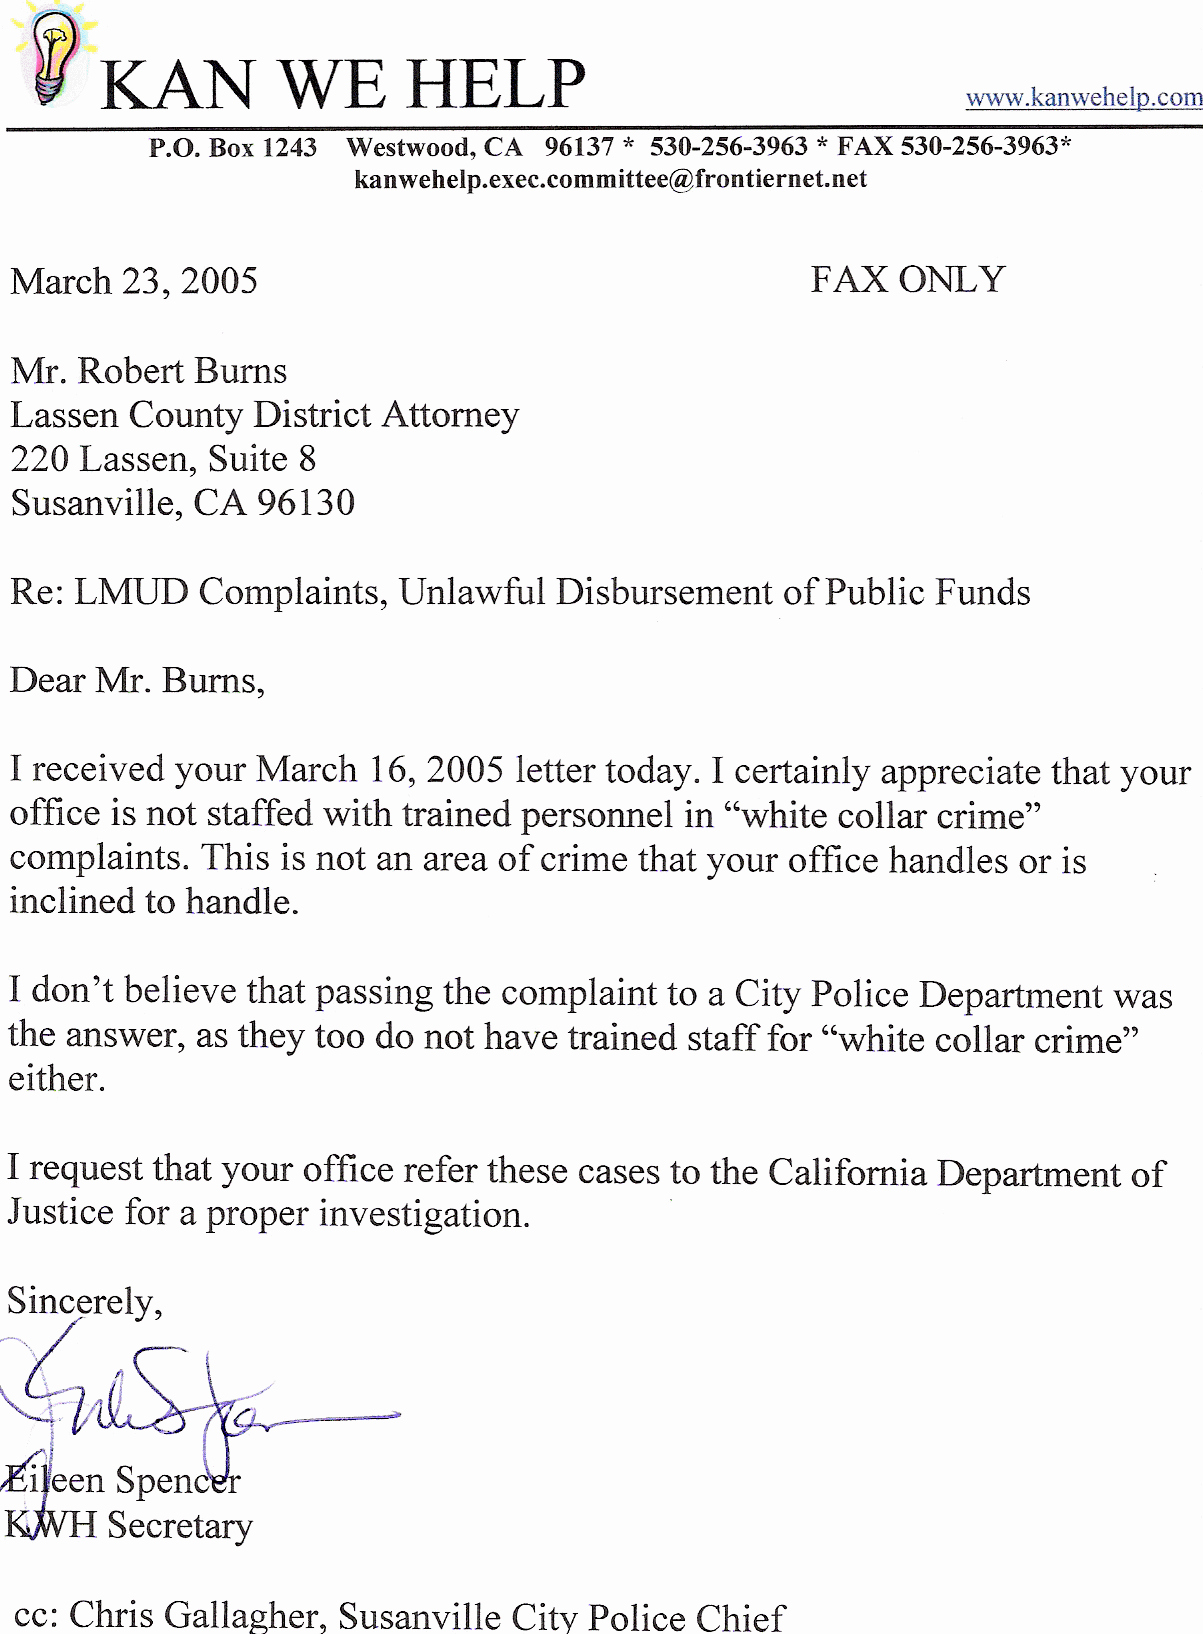 Sample Representation Letter Beautiful Sample Letter How to Fire My attorney